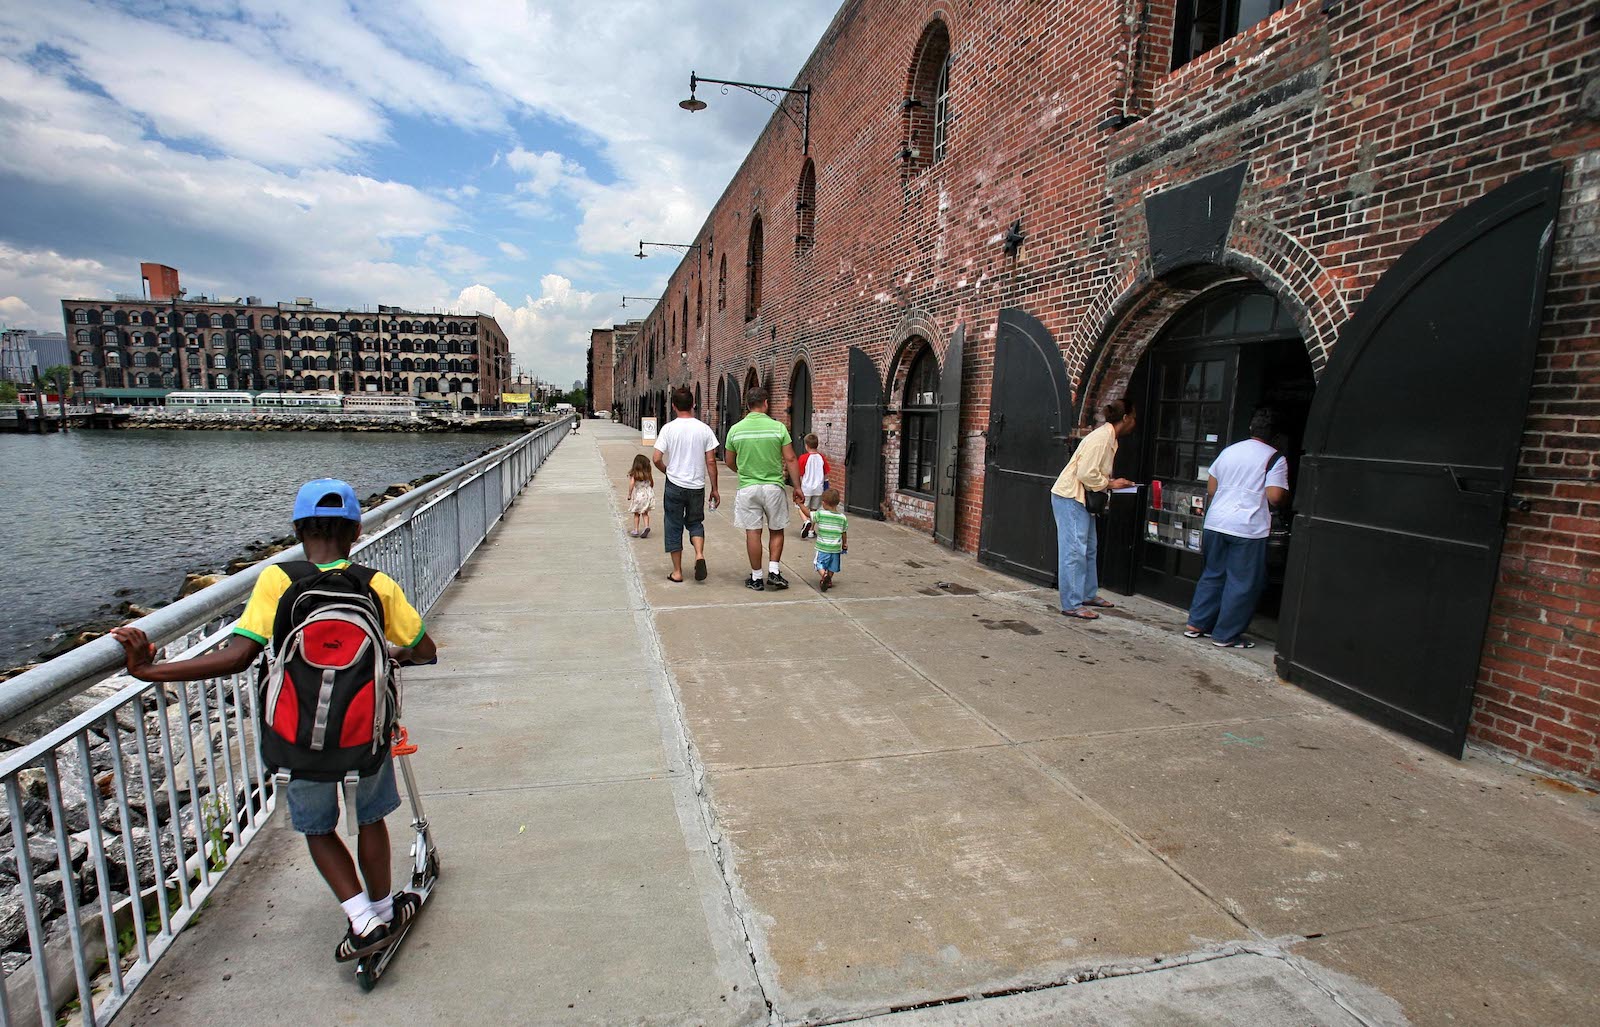 a boy on a scooter rides on a concrete path with water on the left and a red brick building on the right